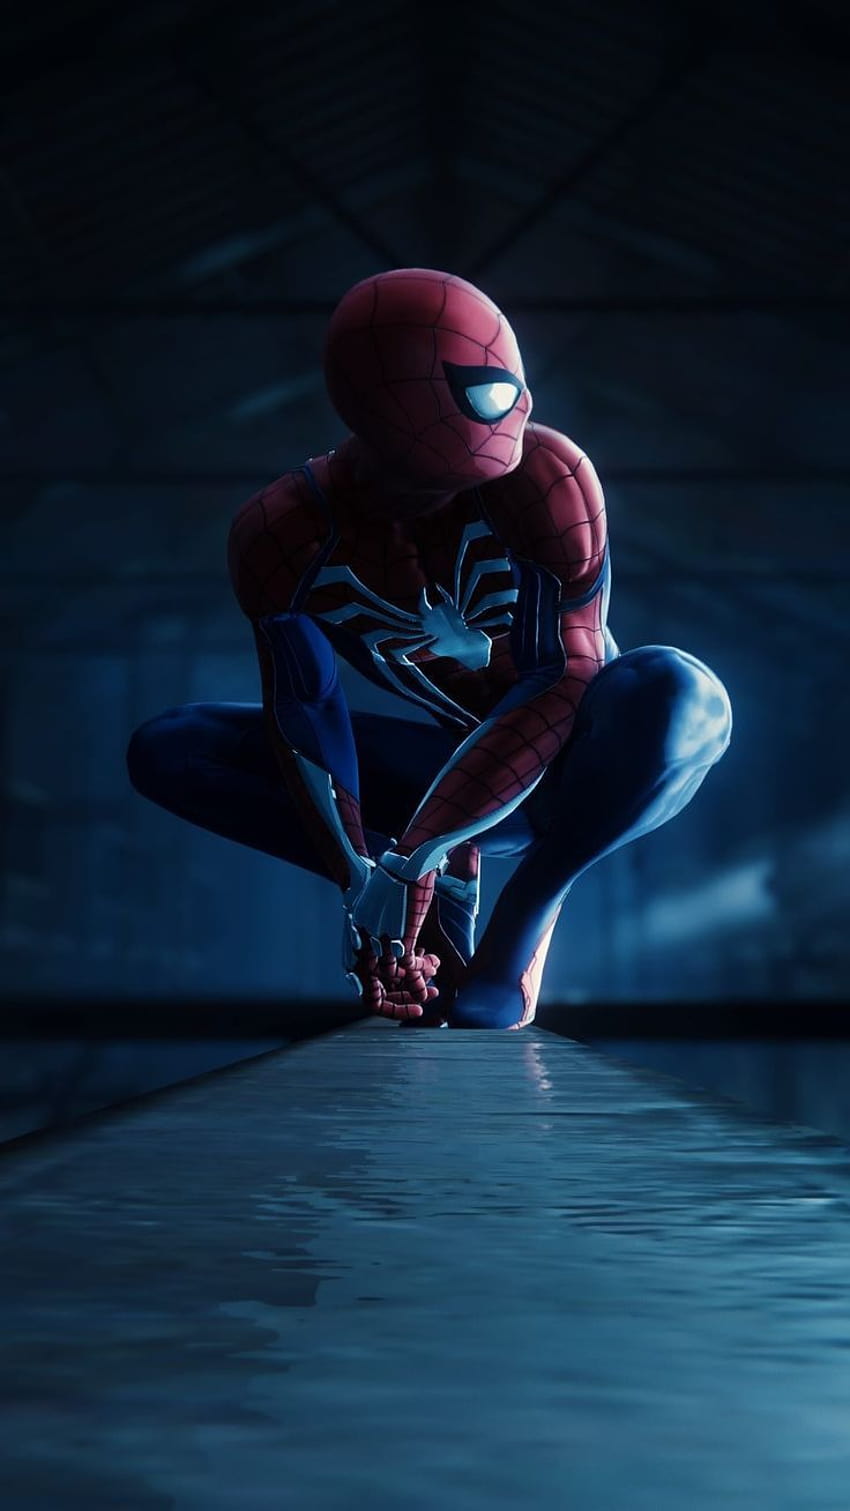 Advanced suit warehouse perch, spider man suits HD phone wallpaper